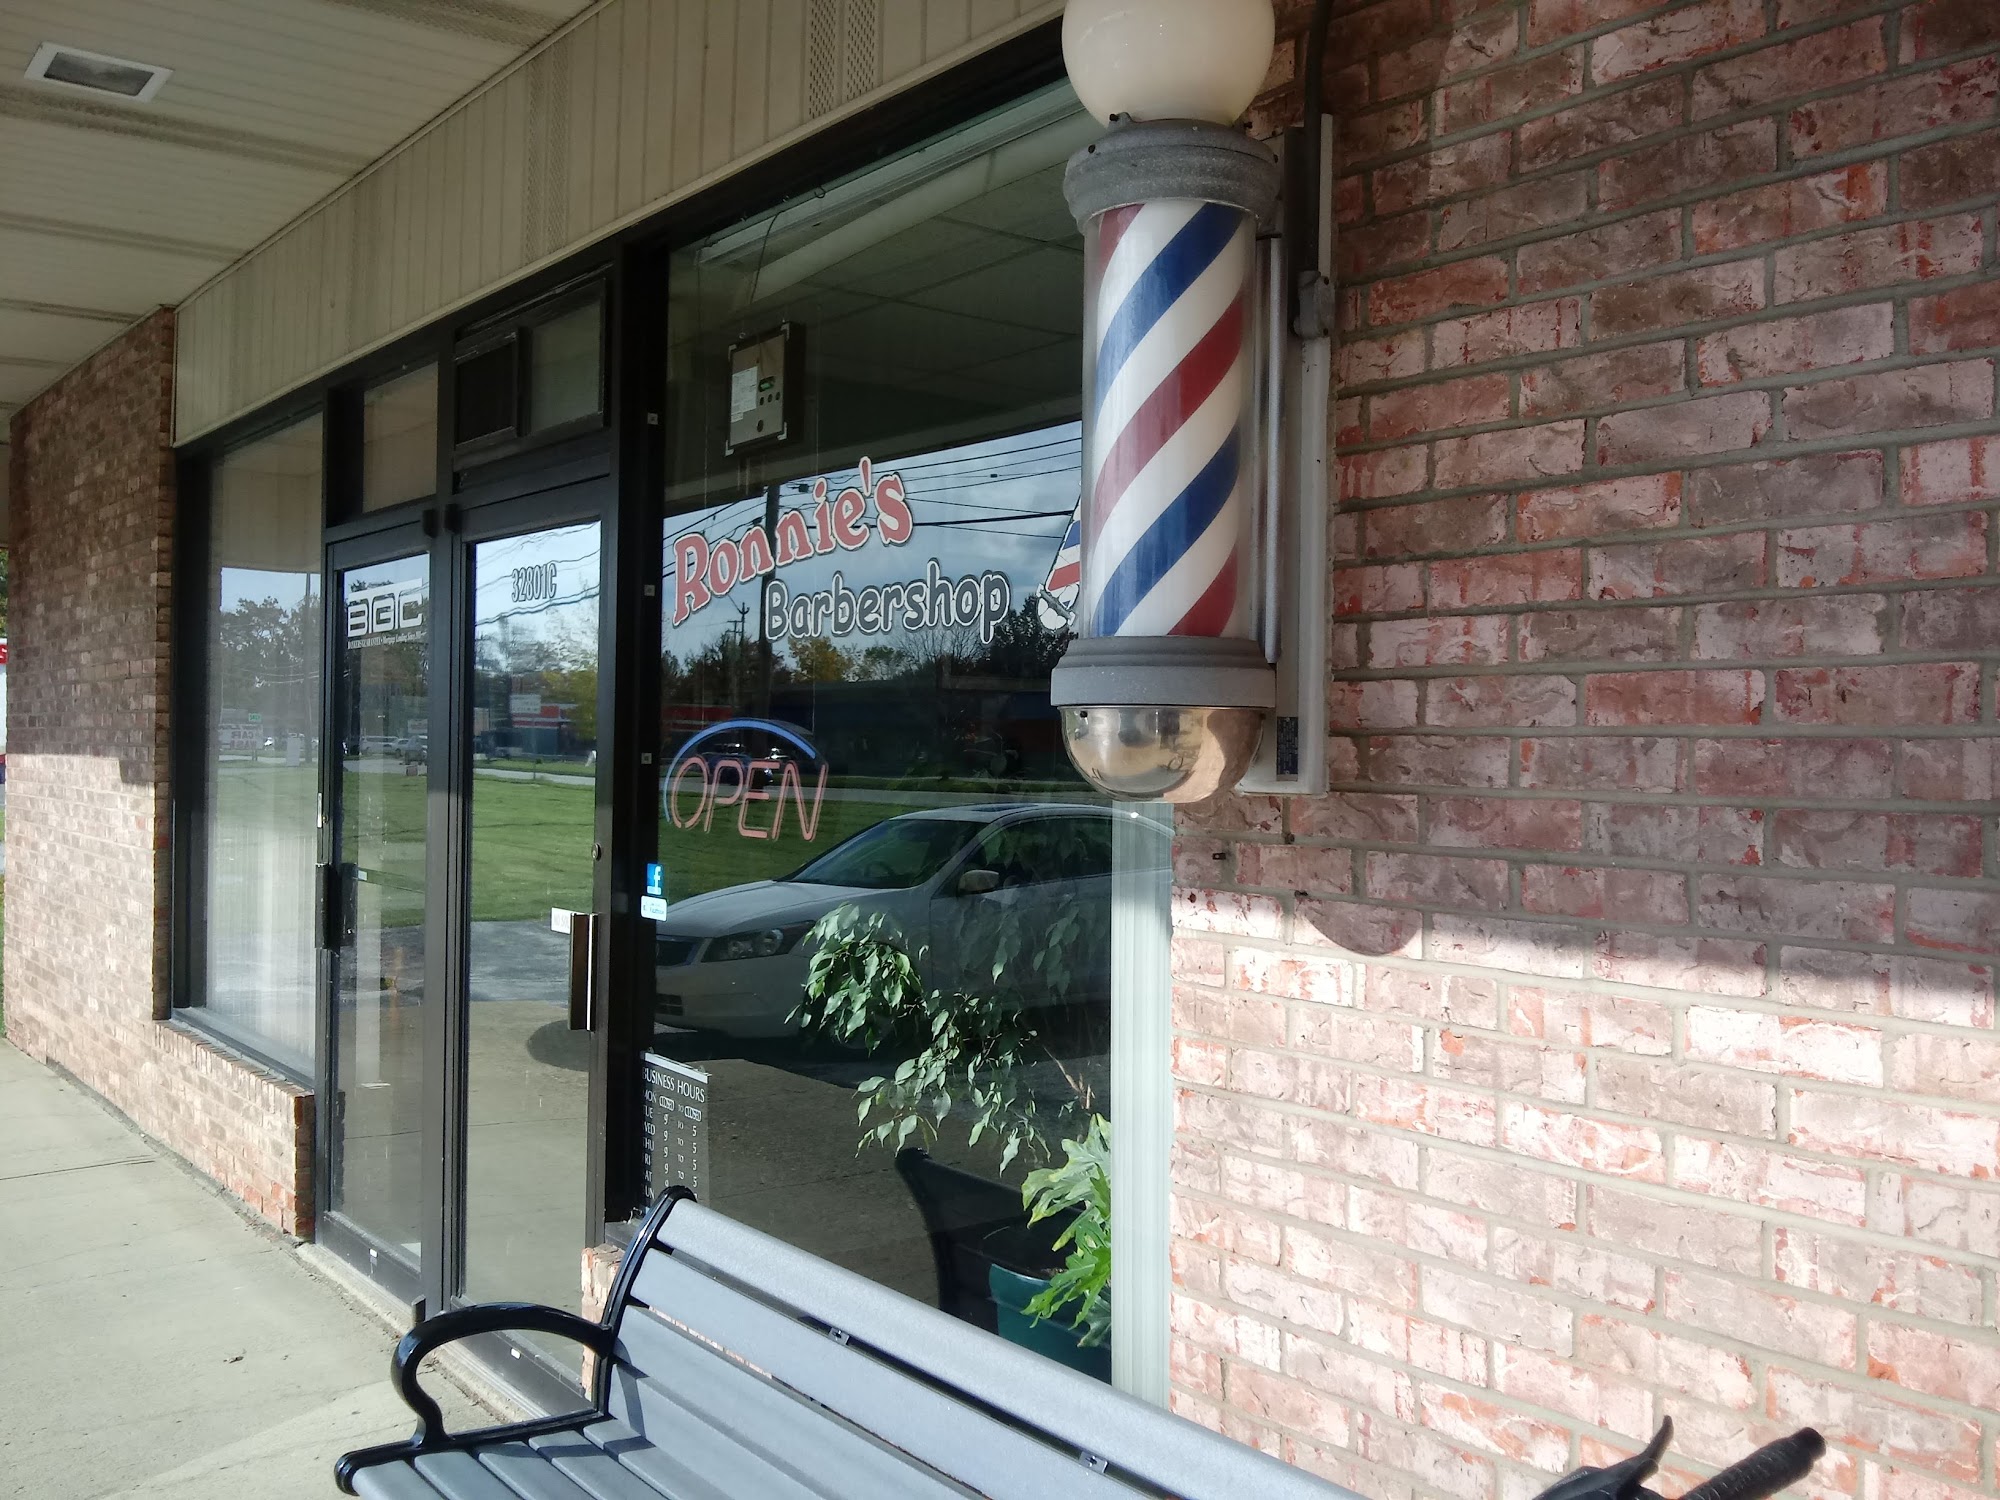 Ronnie's Barber Shop